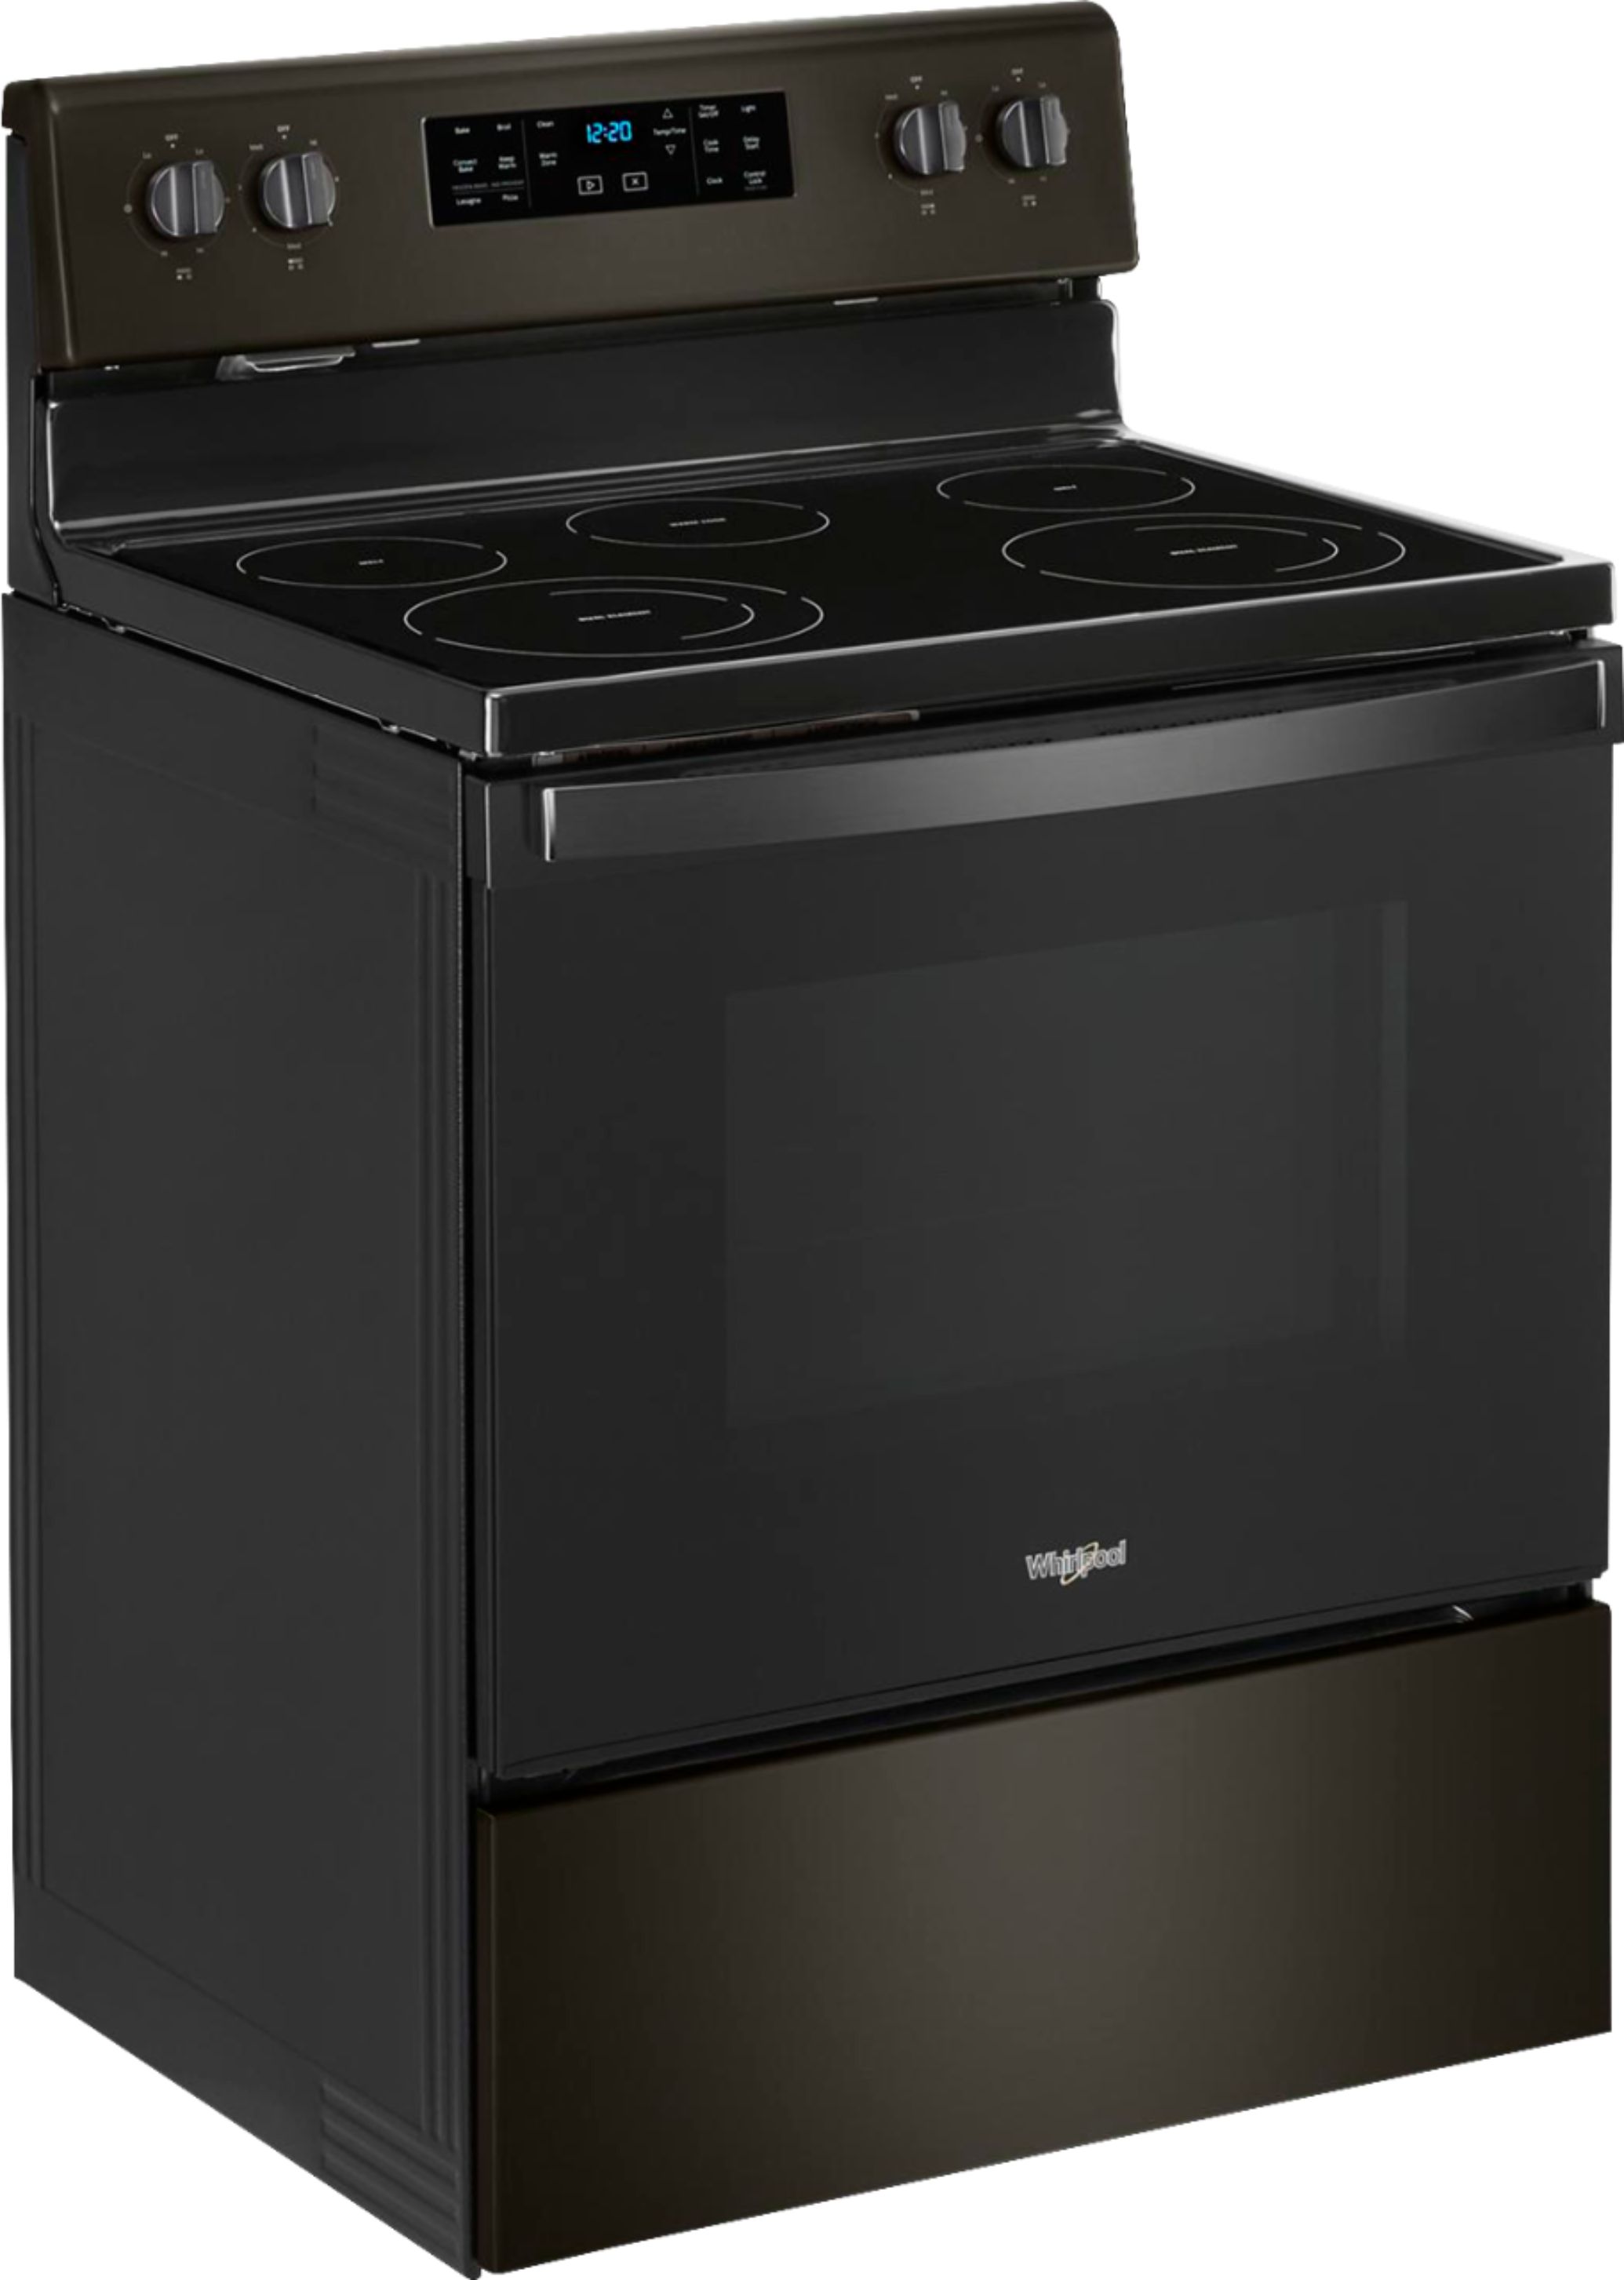 Angle View: Whirlpool - 5.3 Cu. Ft. Freestanding Electric Convection Range Self-High Heat Cleaning Method and Frozen Bake - Black stainless steel